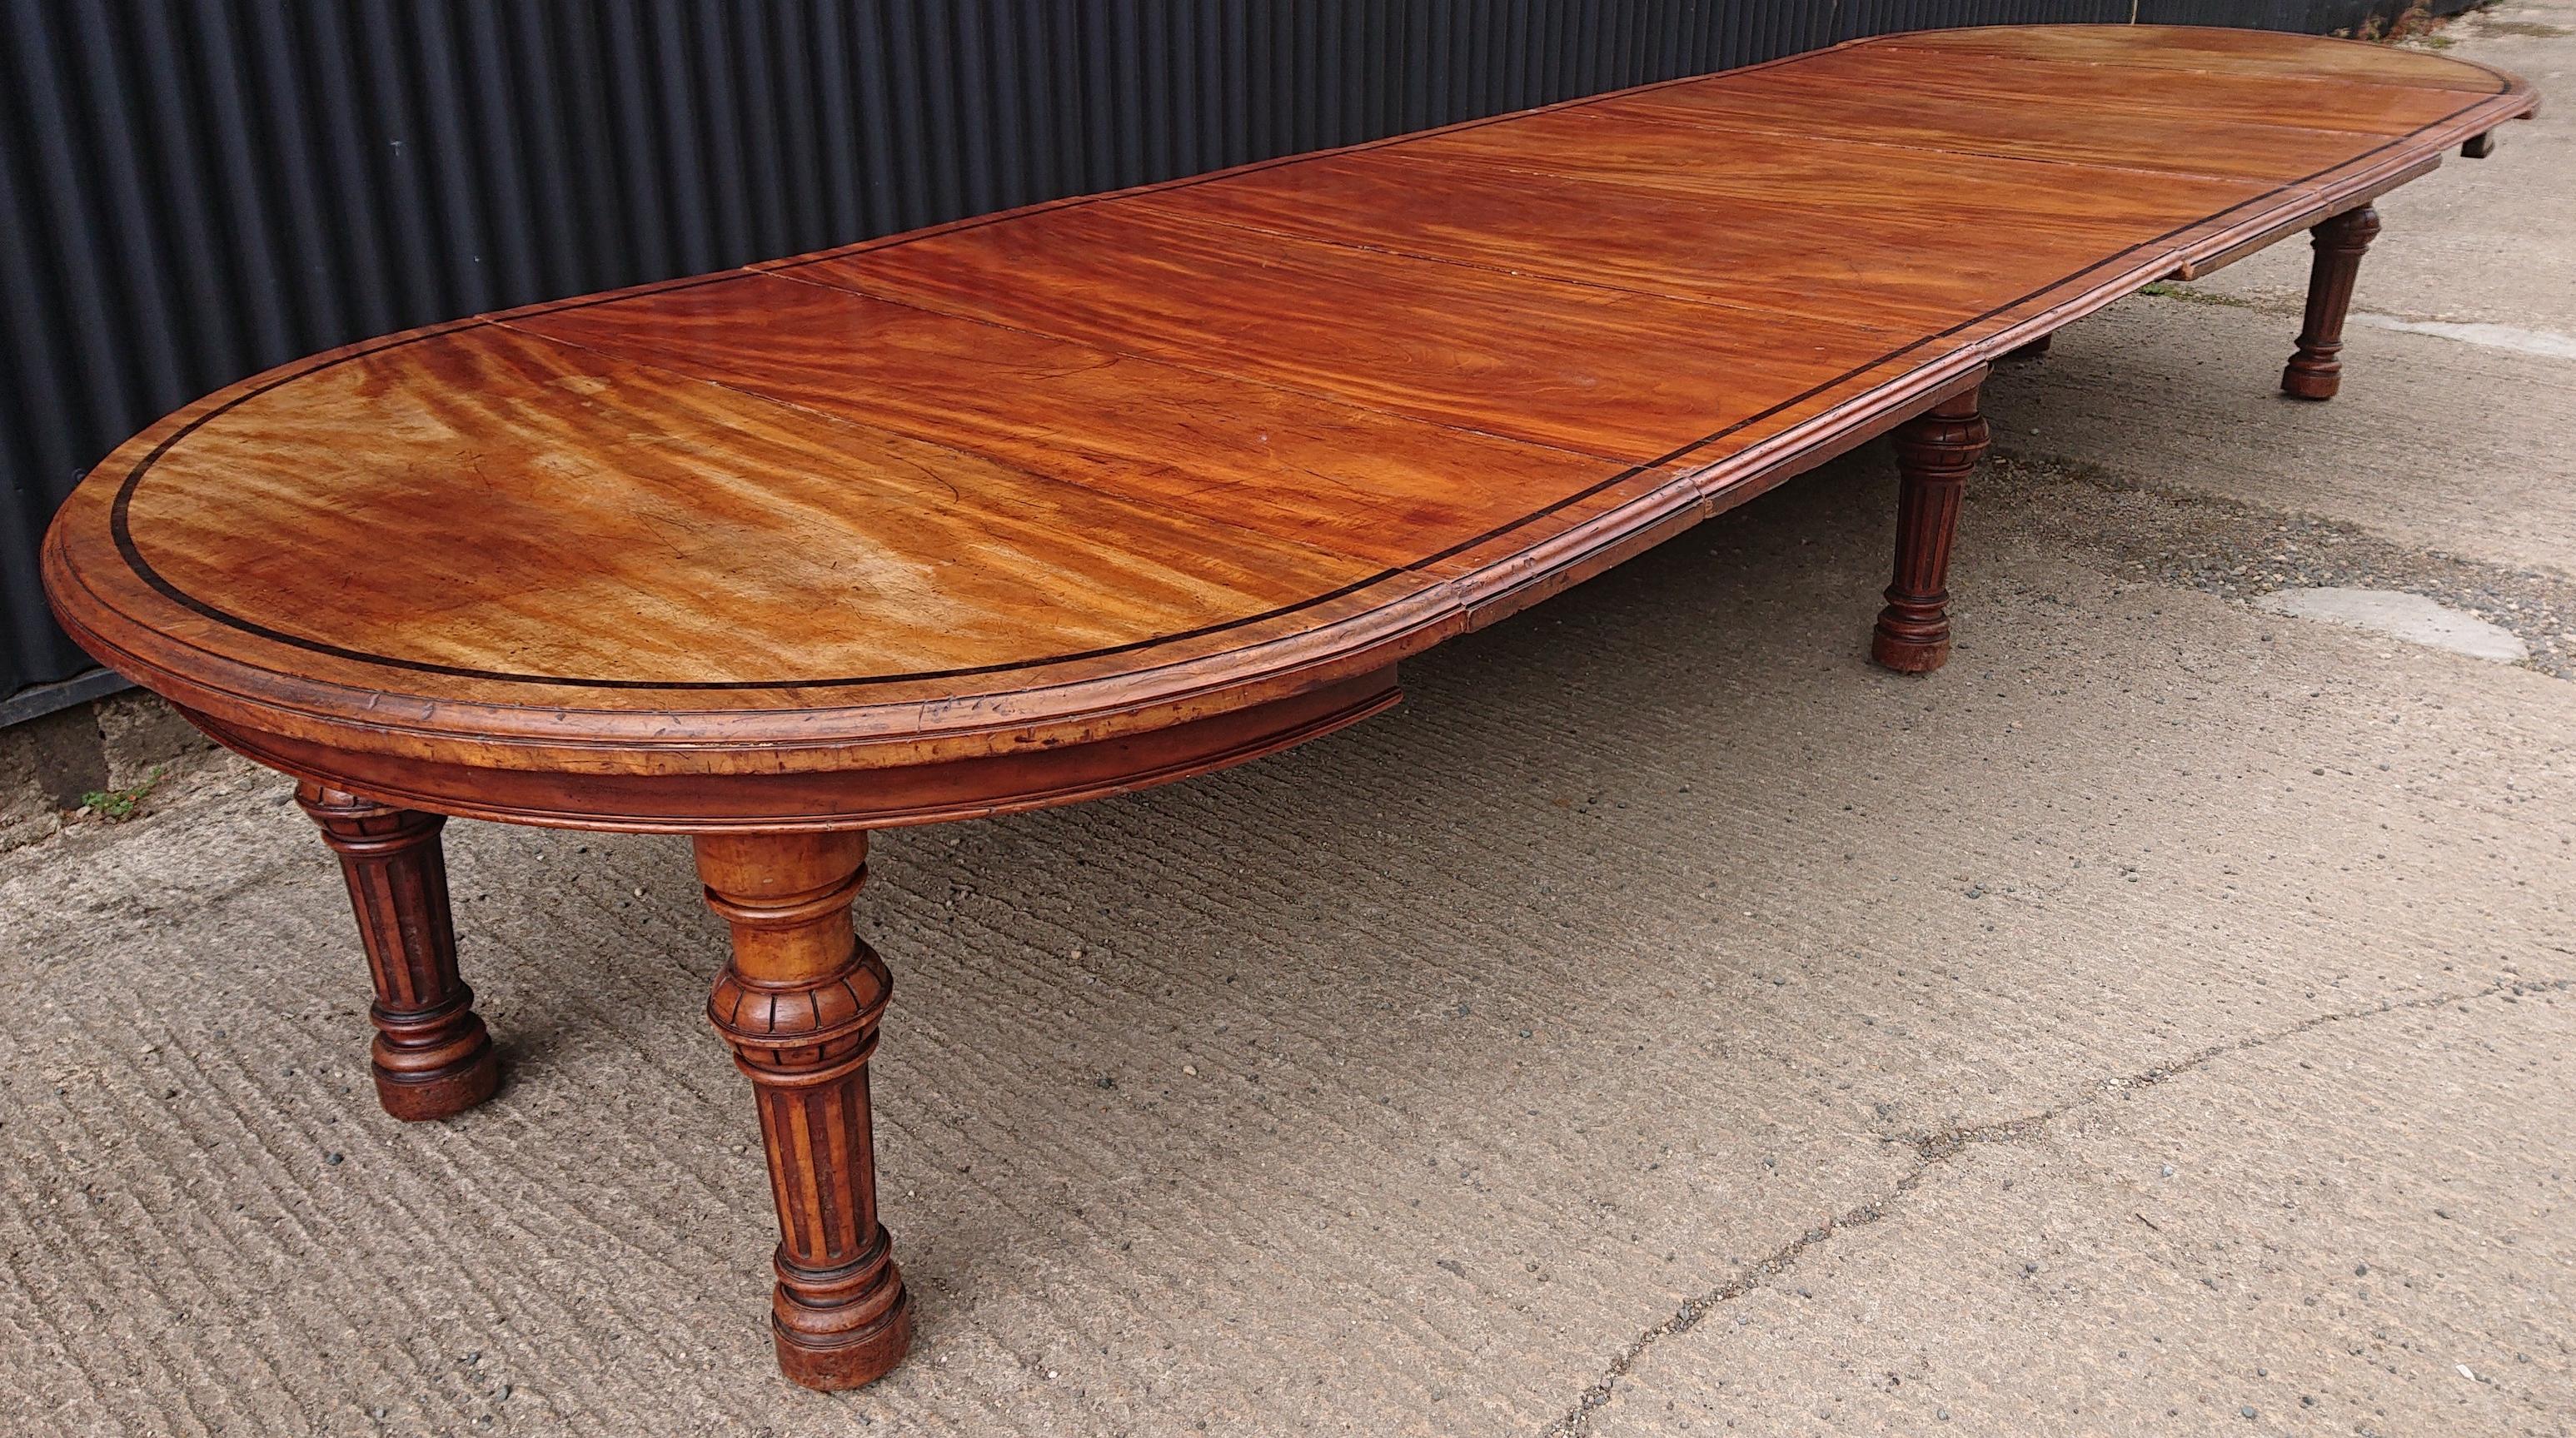 Large antique dining table made by Gillow of Lancaster and London, this table has an exceptionally strong mechanism and stands on only six legs which are tucked away from the edge of the table to provide maximum leg room in typical Gillow fashion.